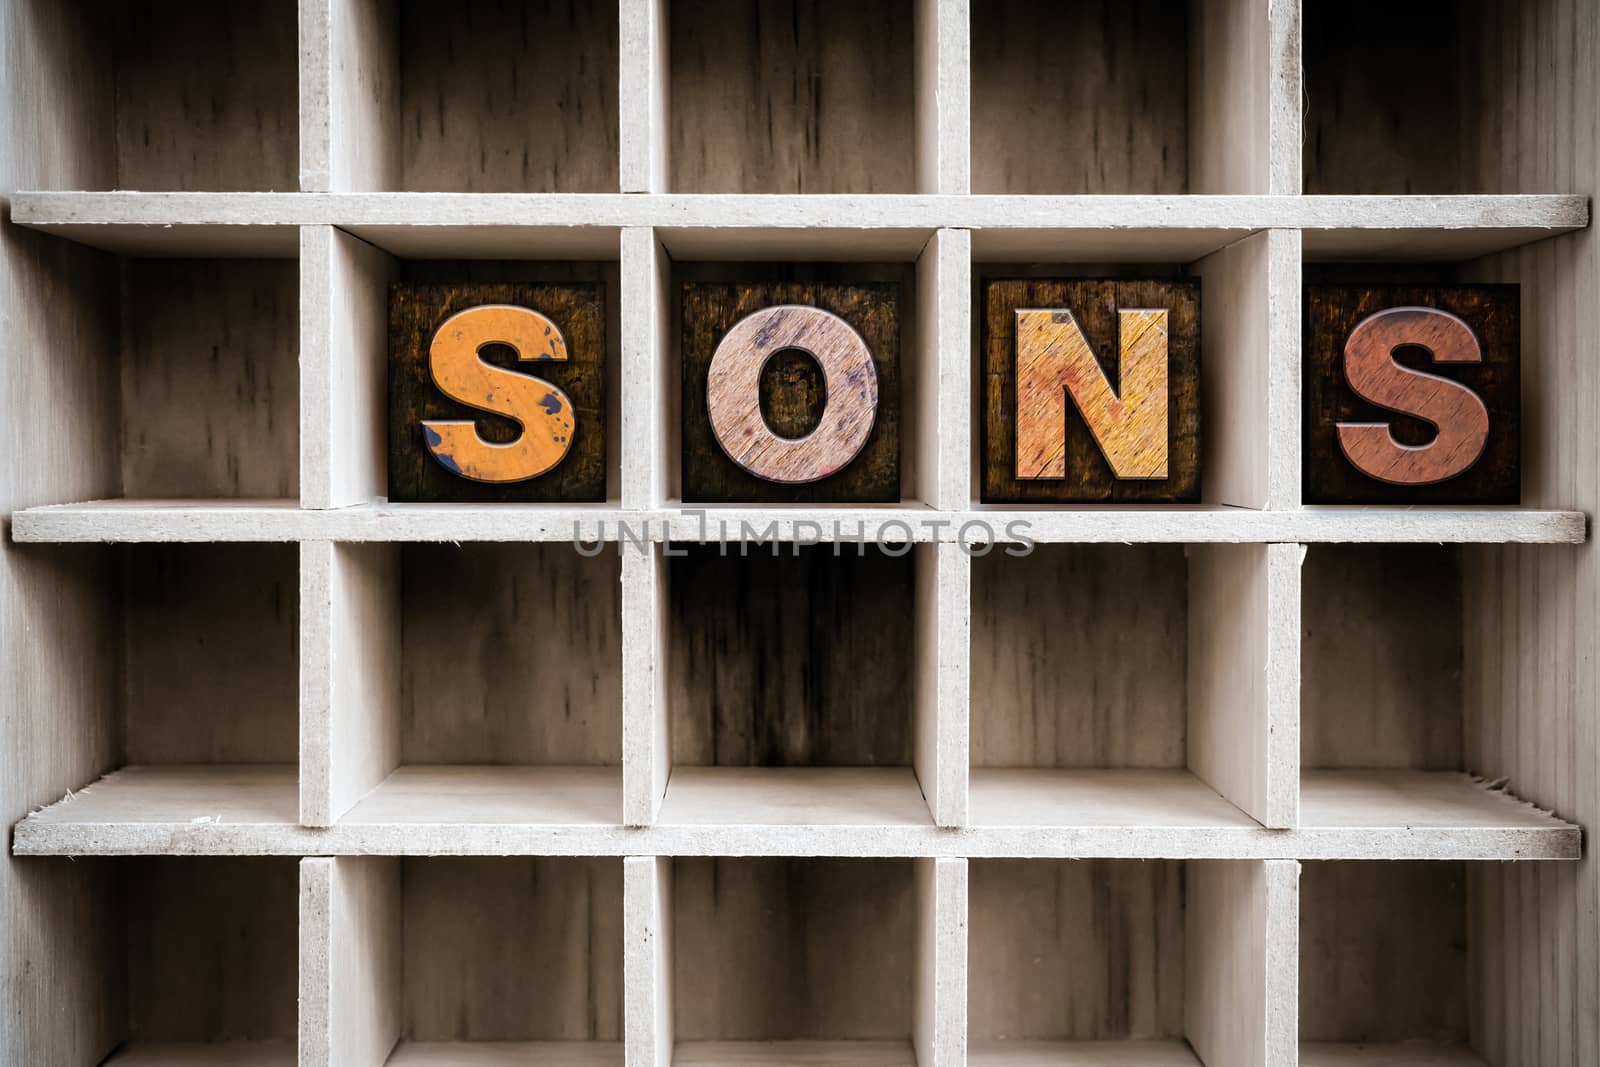 The word "SONS" written in vintage ink stained wooden letterpress type in a partitioned printer's drawer.